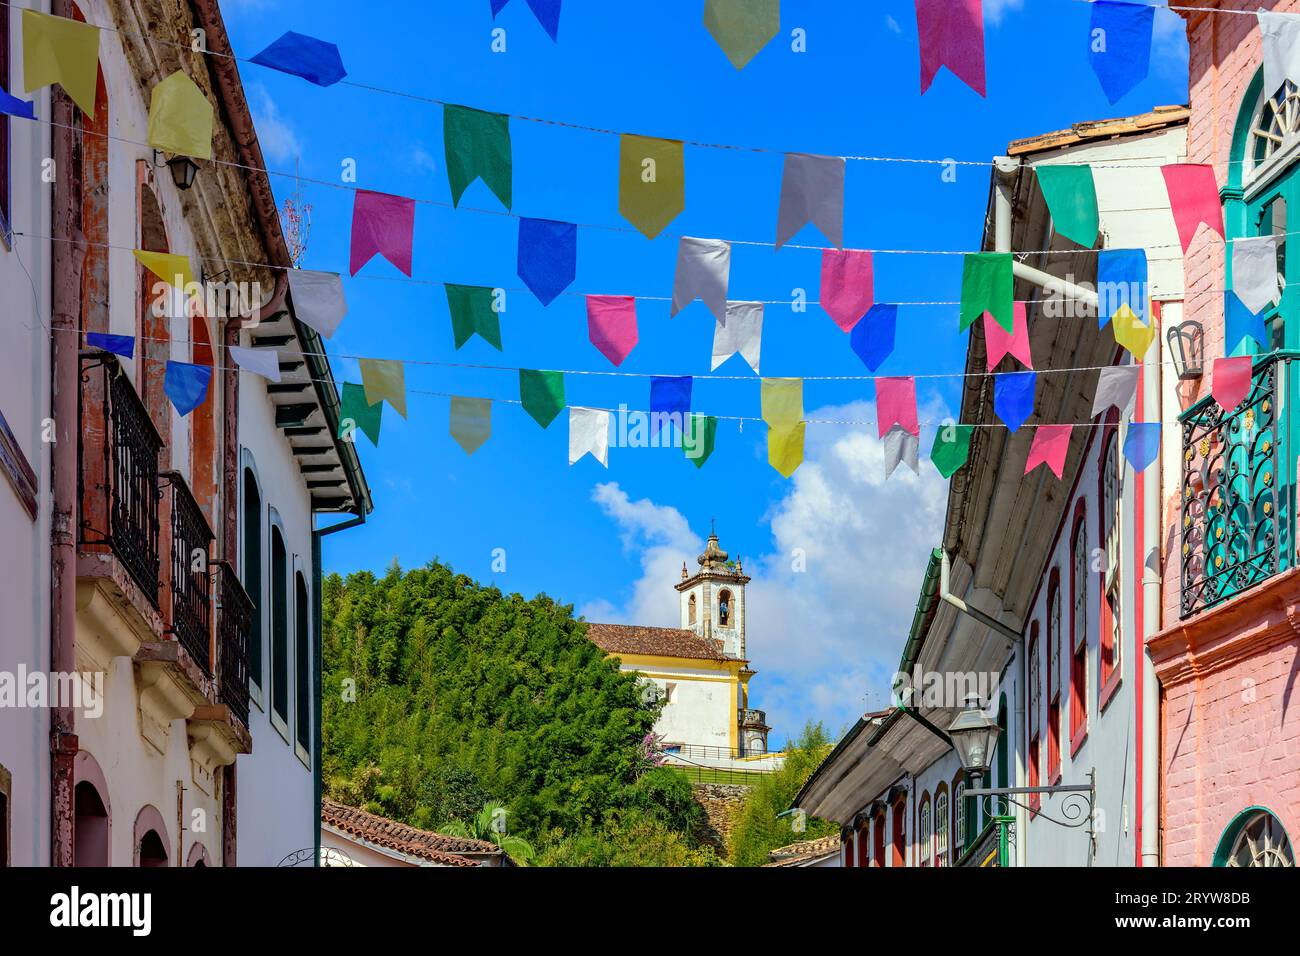 Street decorated with flags for the Saint John festivities Stock Photo